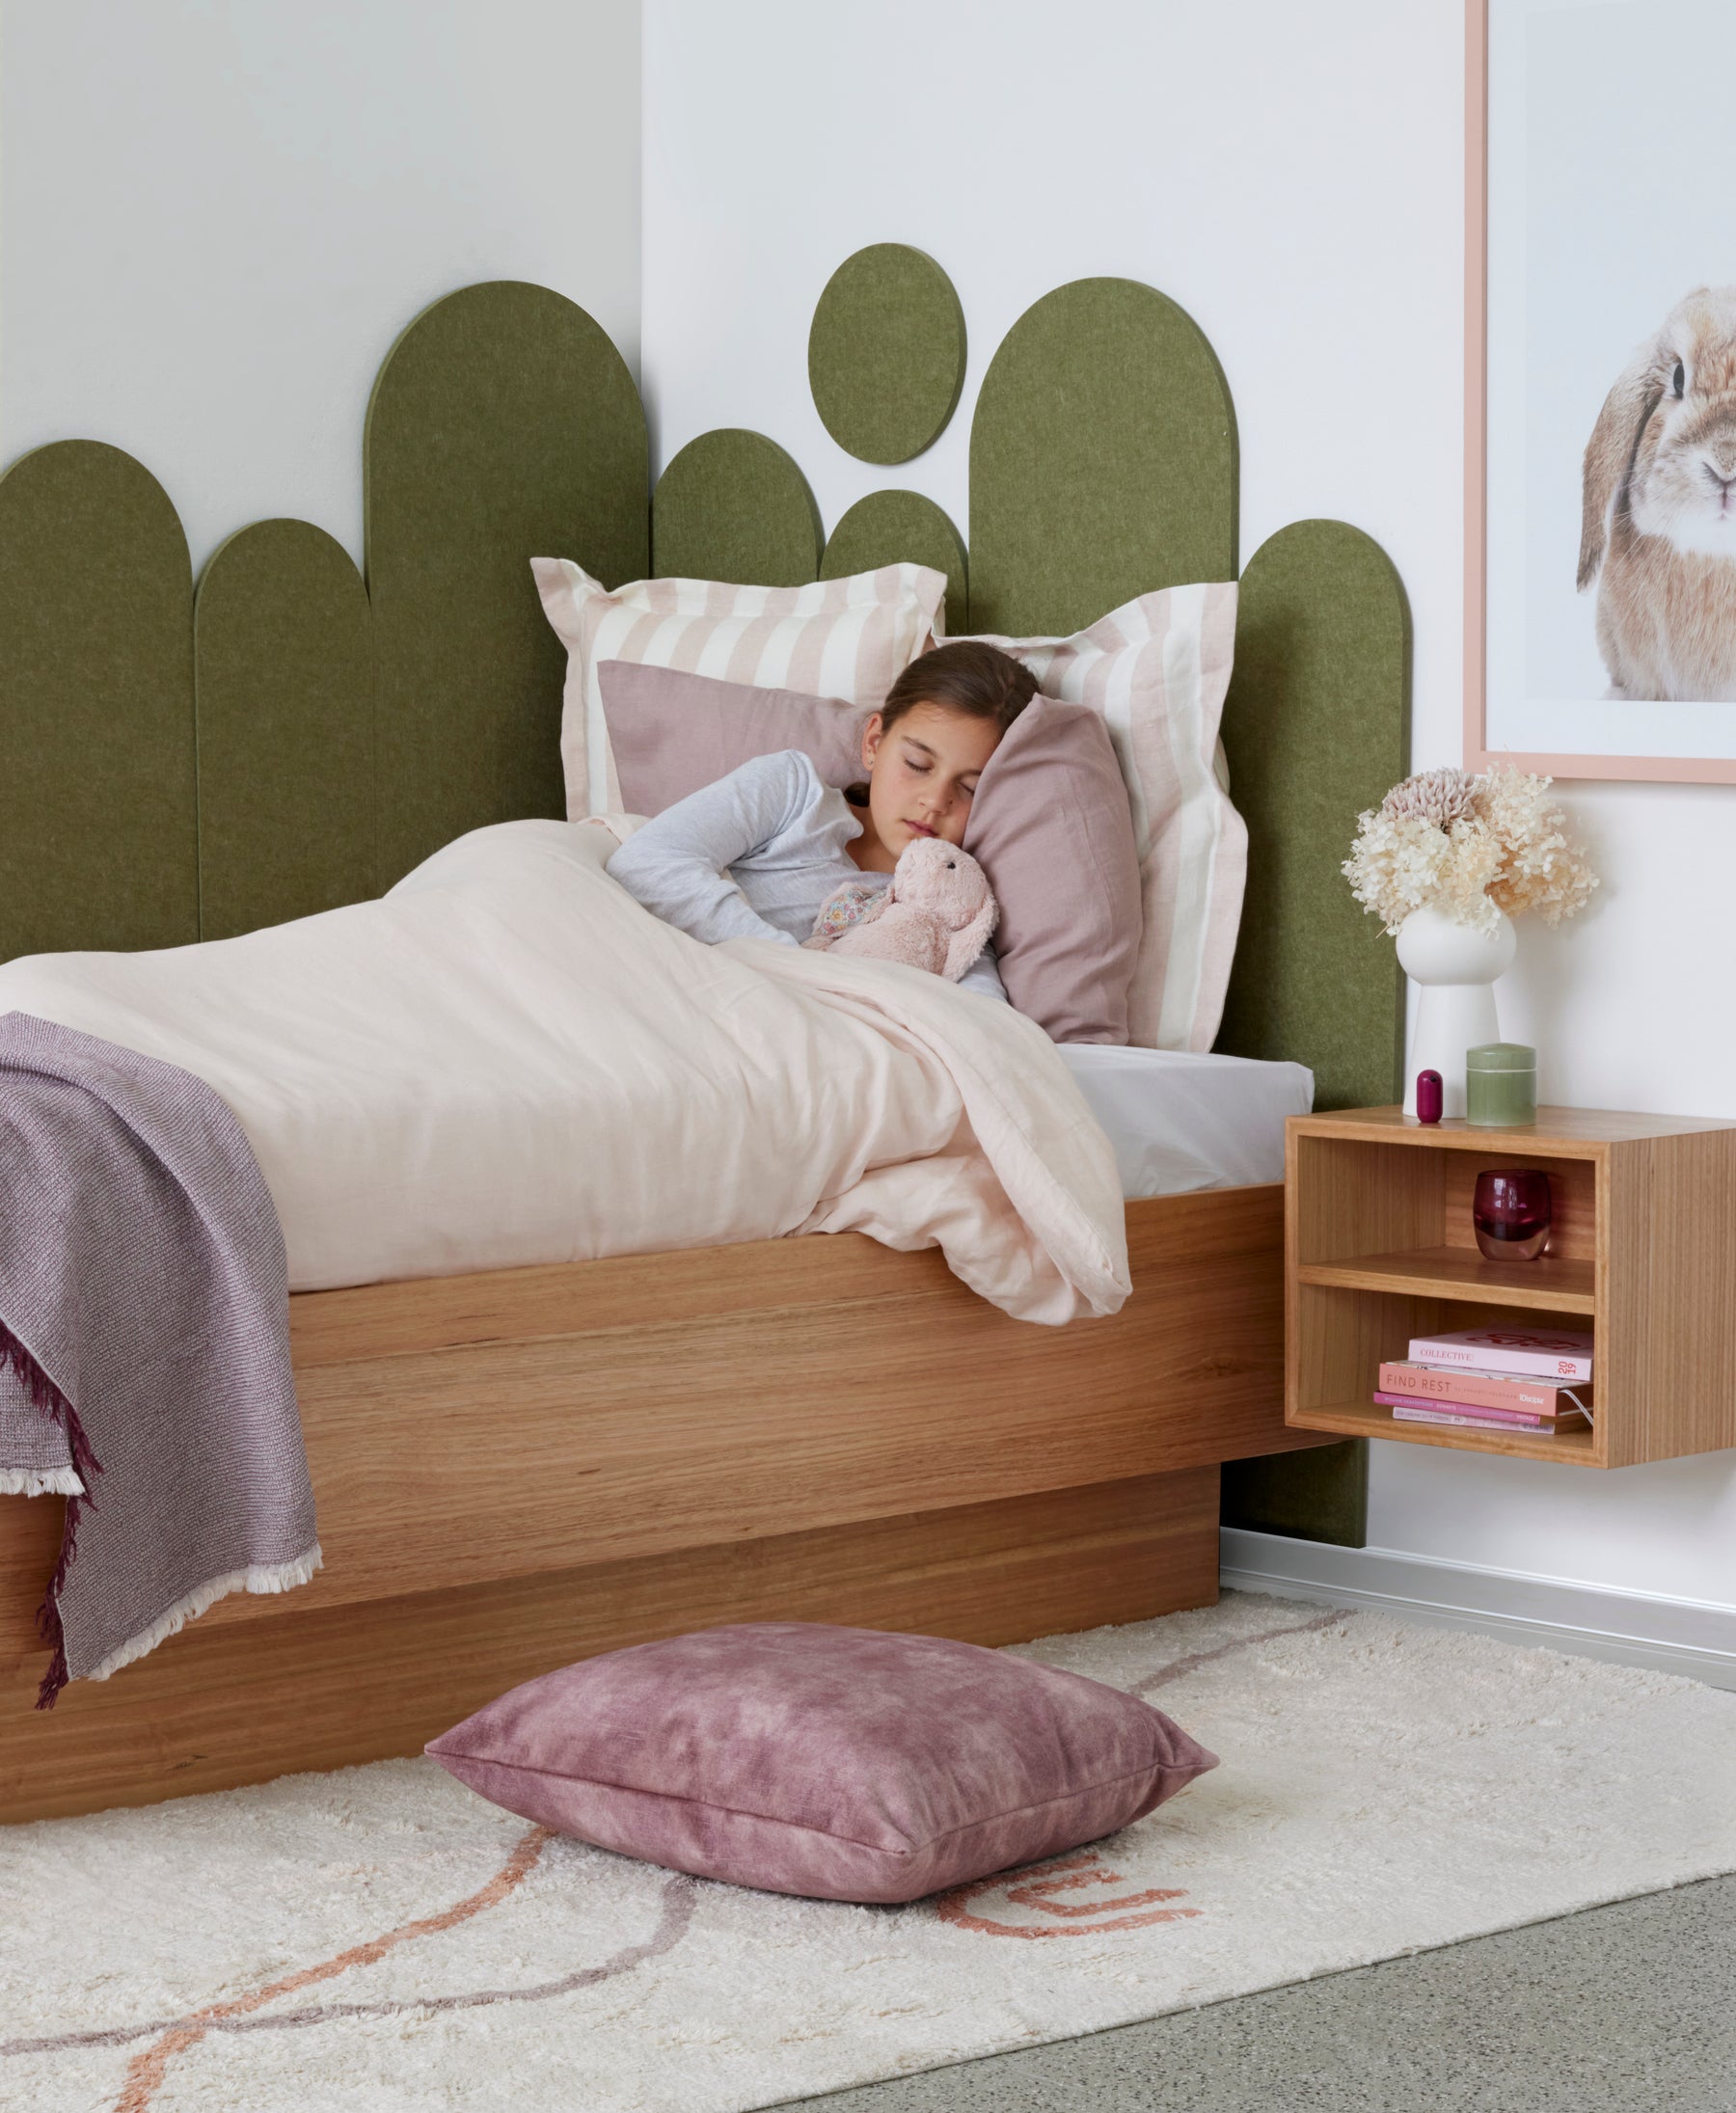 Lilly and Lolly's Ned Colection of timber furniture for children, is designed to have minimal impact on the floor space of a bedroom floor, making this range perfect for smaller kids bedrooms.